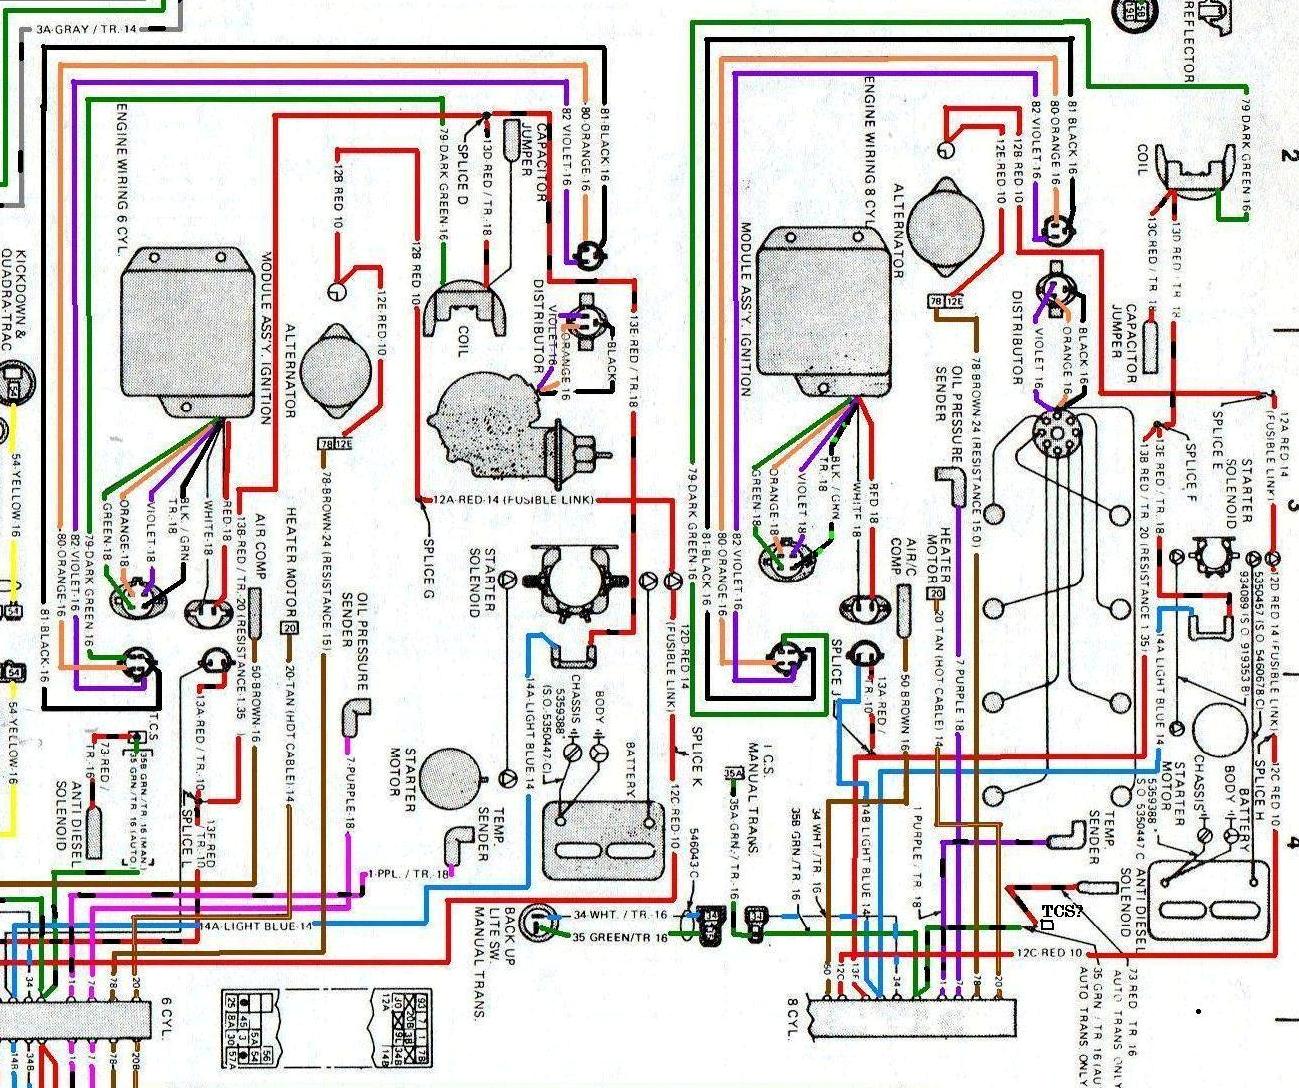 1979 Dodge Stater Relay Wiring from www.2carpros.com